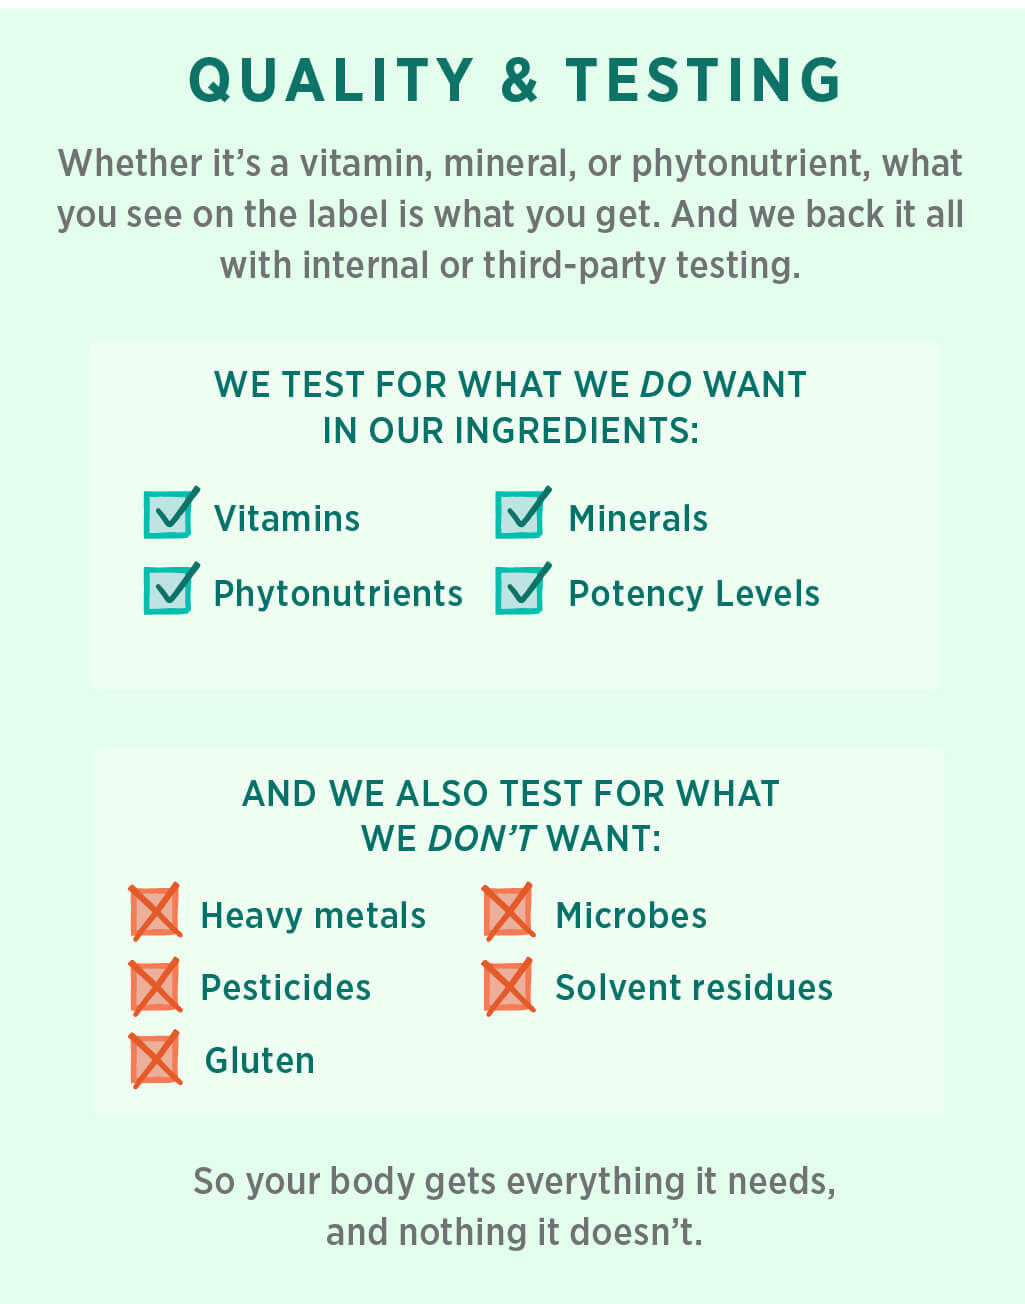 Quality & Testing: Whether it's a vitamin, mineral, or phytonutrient, what you see on the label is what you get. And we back it all with internal or third party-testing.